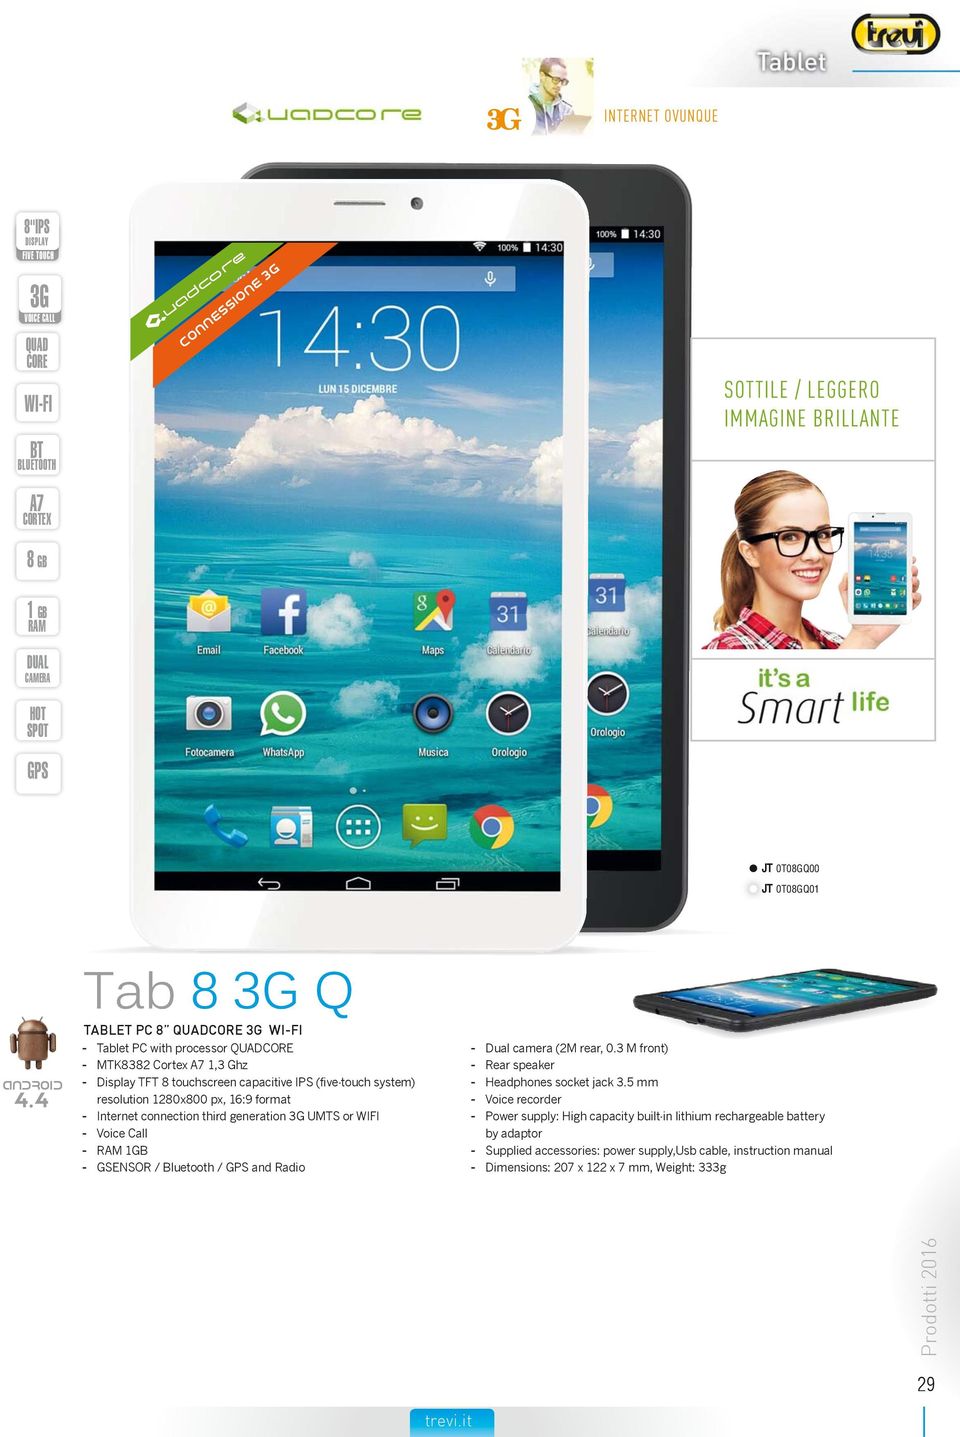 4 Tab 8 3G Q TABLET PC 8 QUADCORE 3G WI-FI - Tablet PC with processor QUADCORE - MTK8382 Cortex A7 1,3 Ghz - Display TFT 8 touchscreen capacitive IPS (five-touch system) resolution 1280x800 px, 16:9